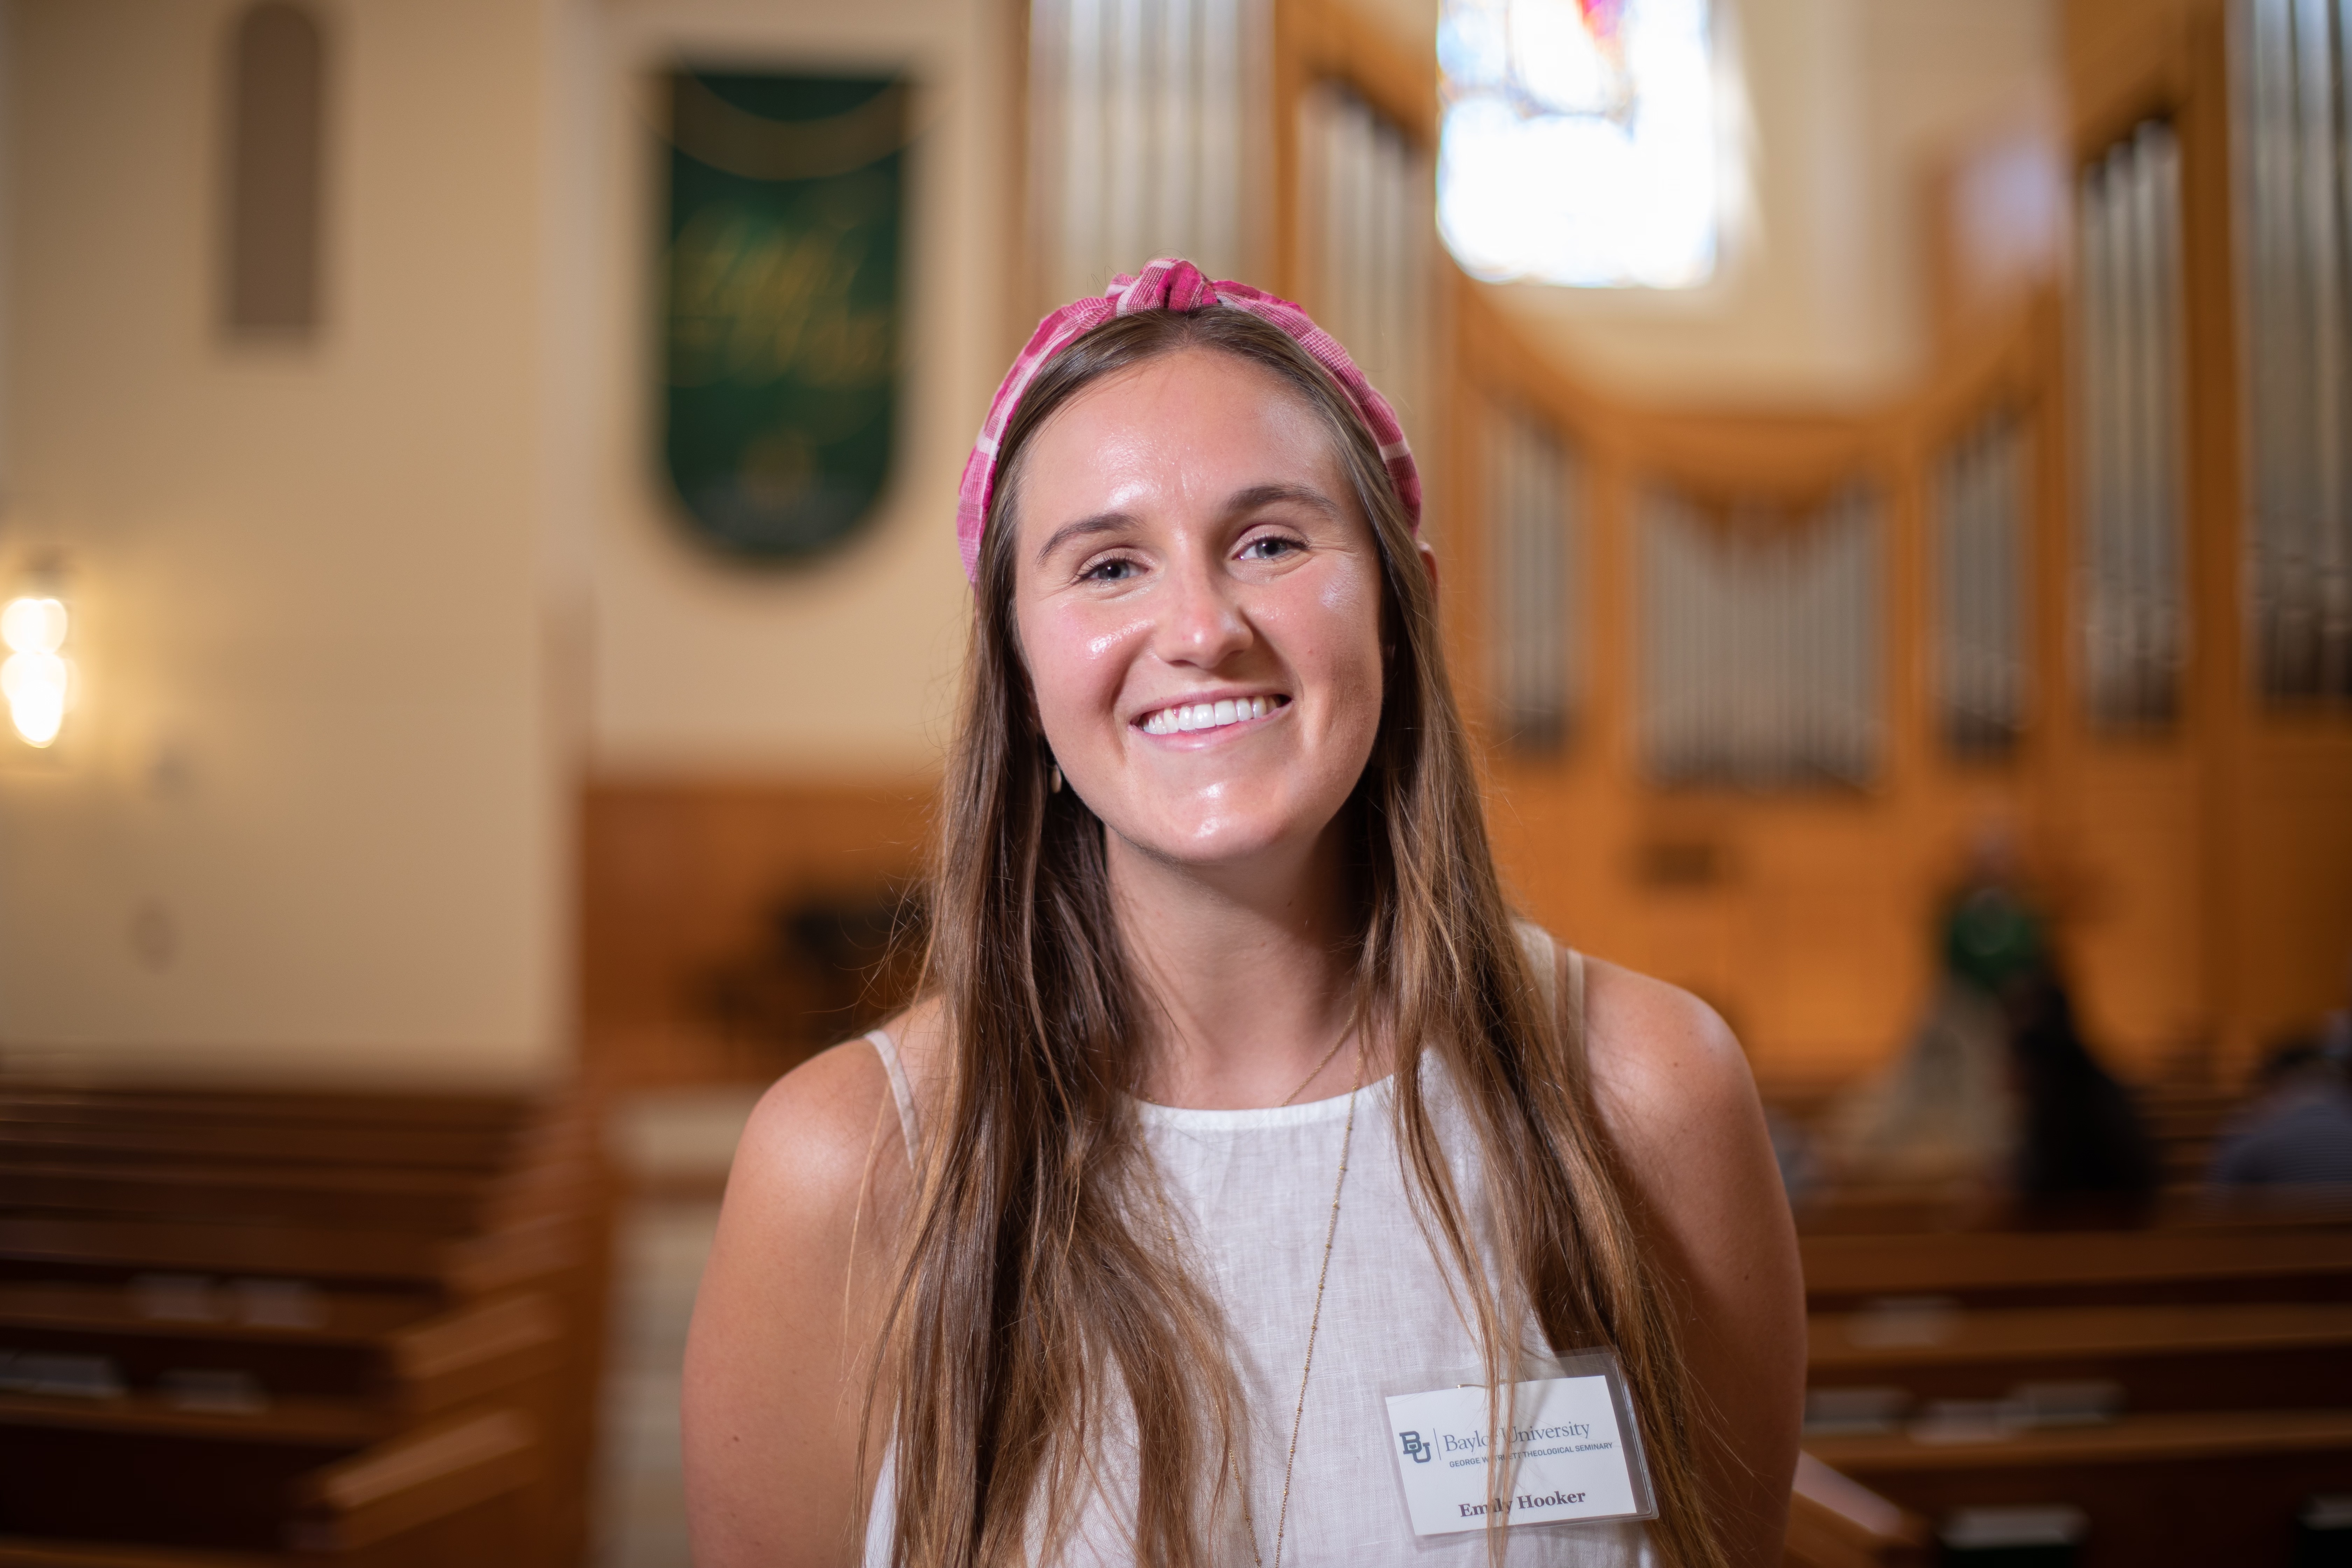 Emily Hooker stands in a white tank top and pink headband in the Truett Chapel. The background is blurred and Emily is seen smiling from mid chest up. 